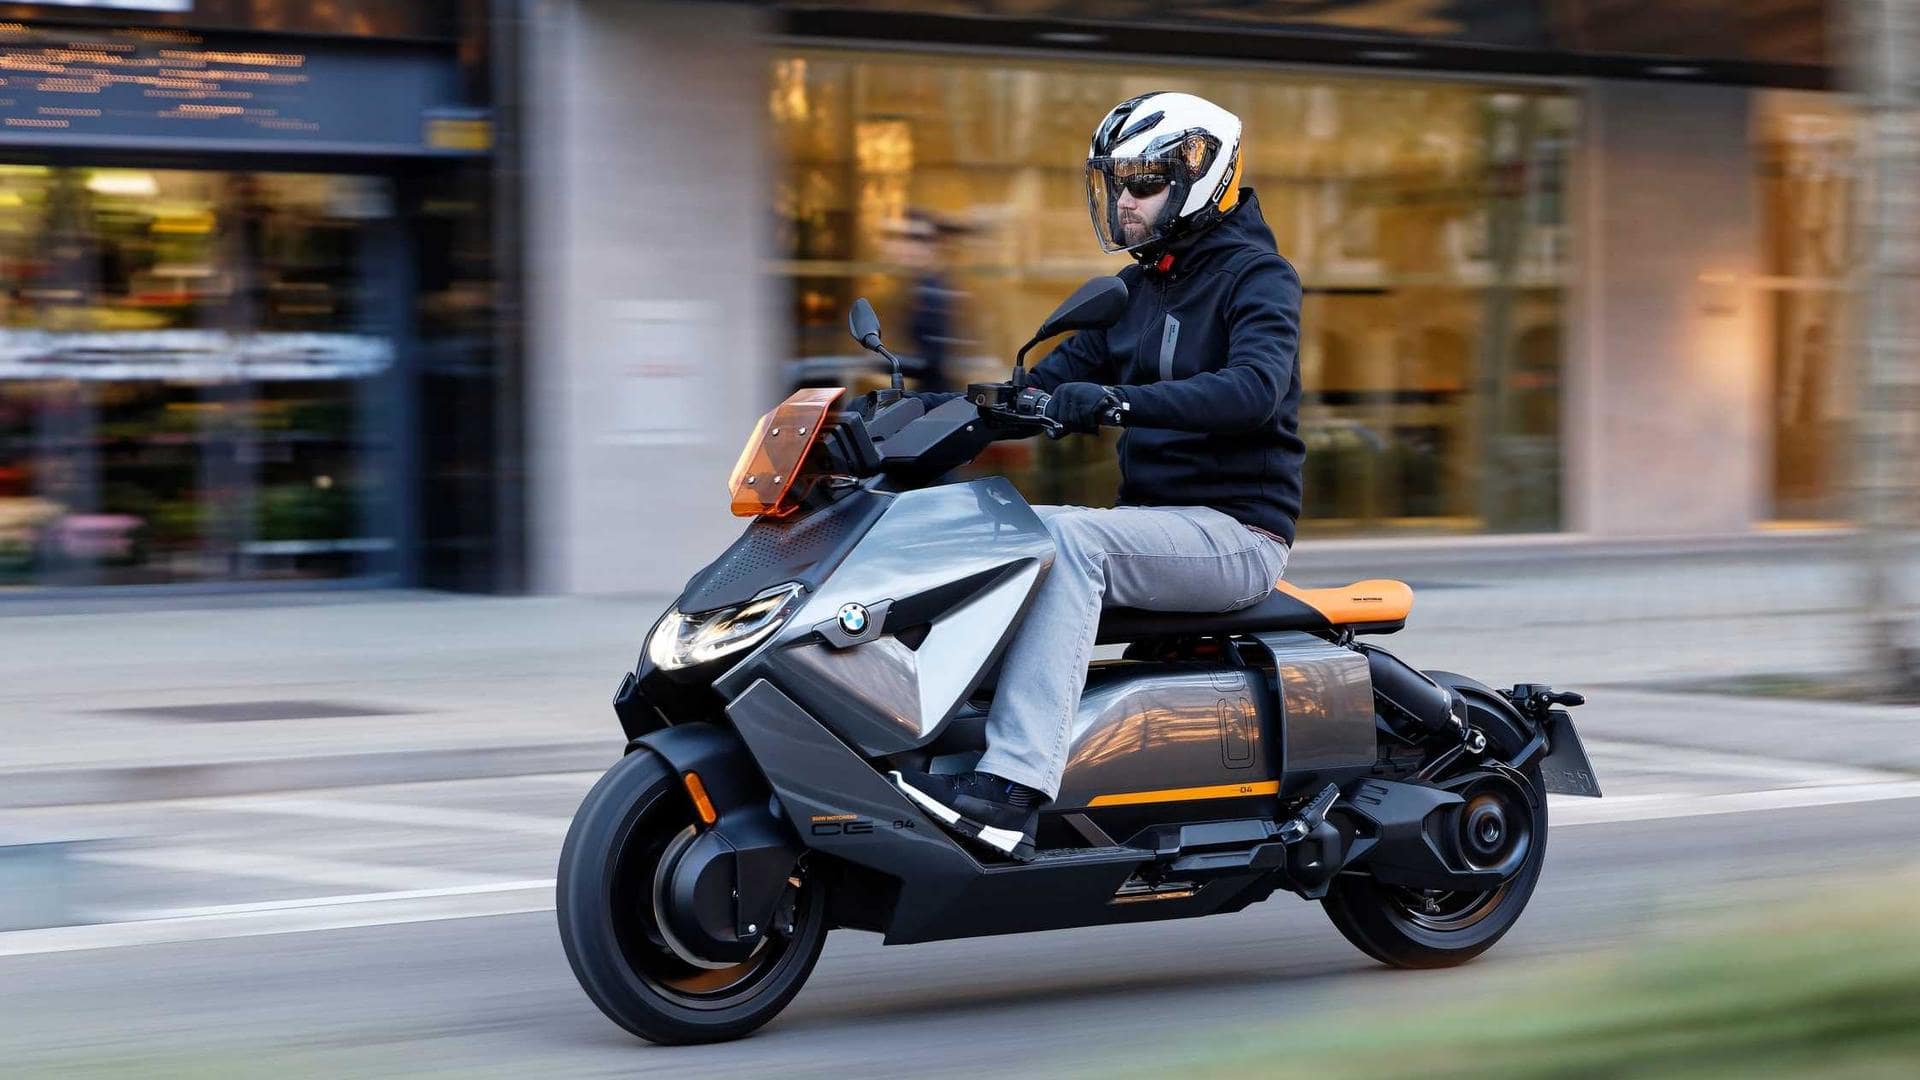 BMW CE 04 e-scooter: A look at its top features